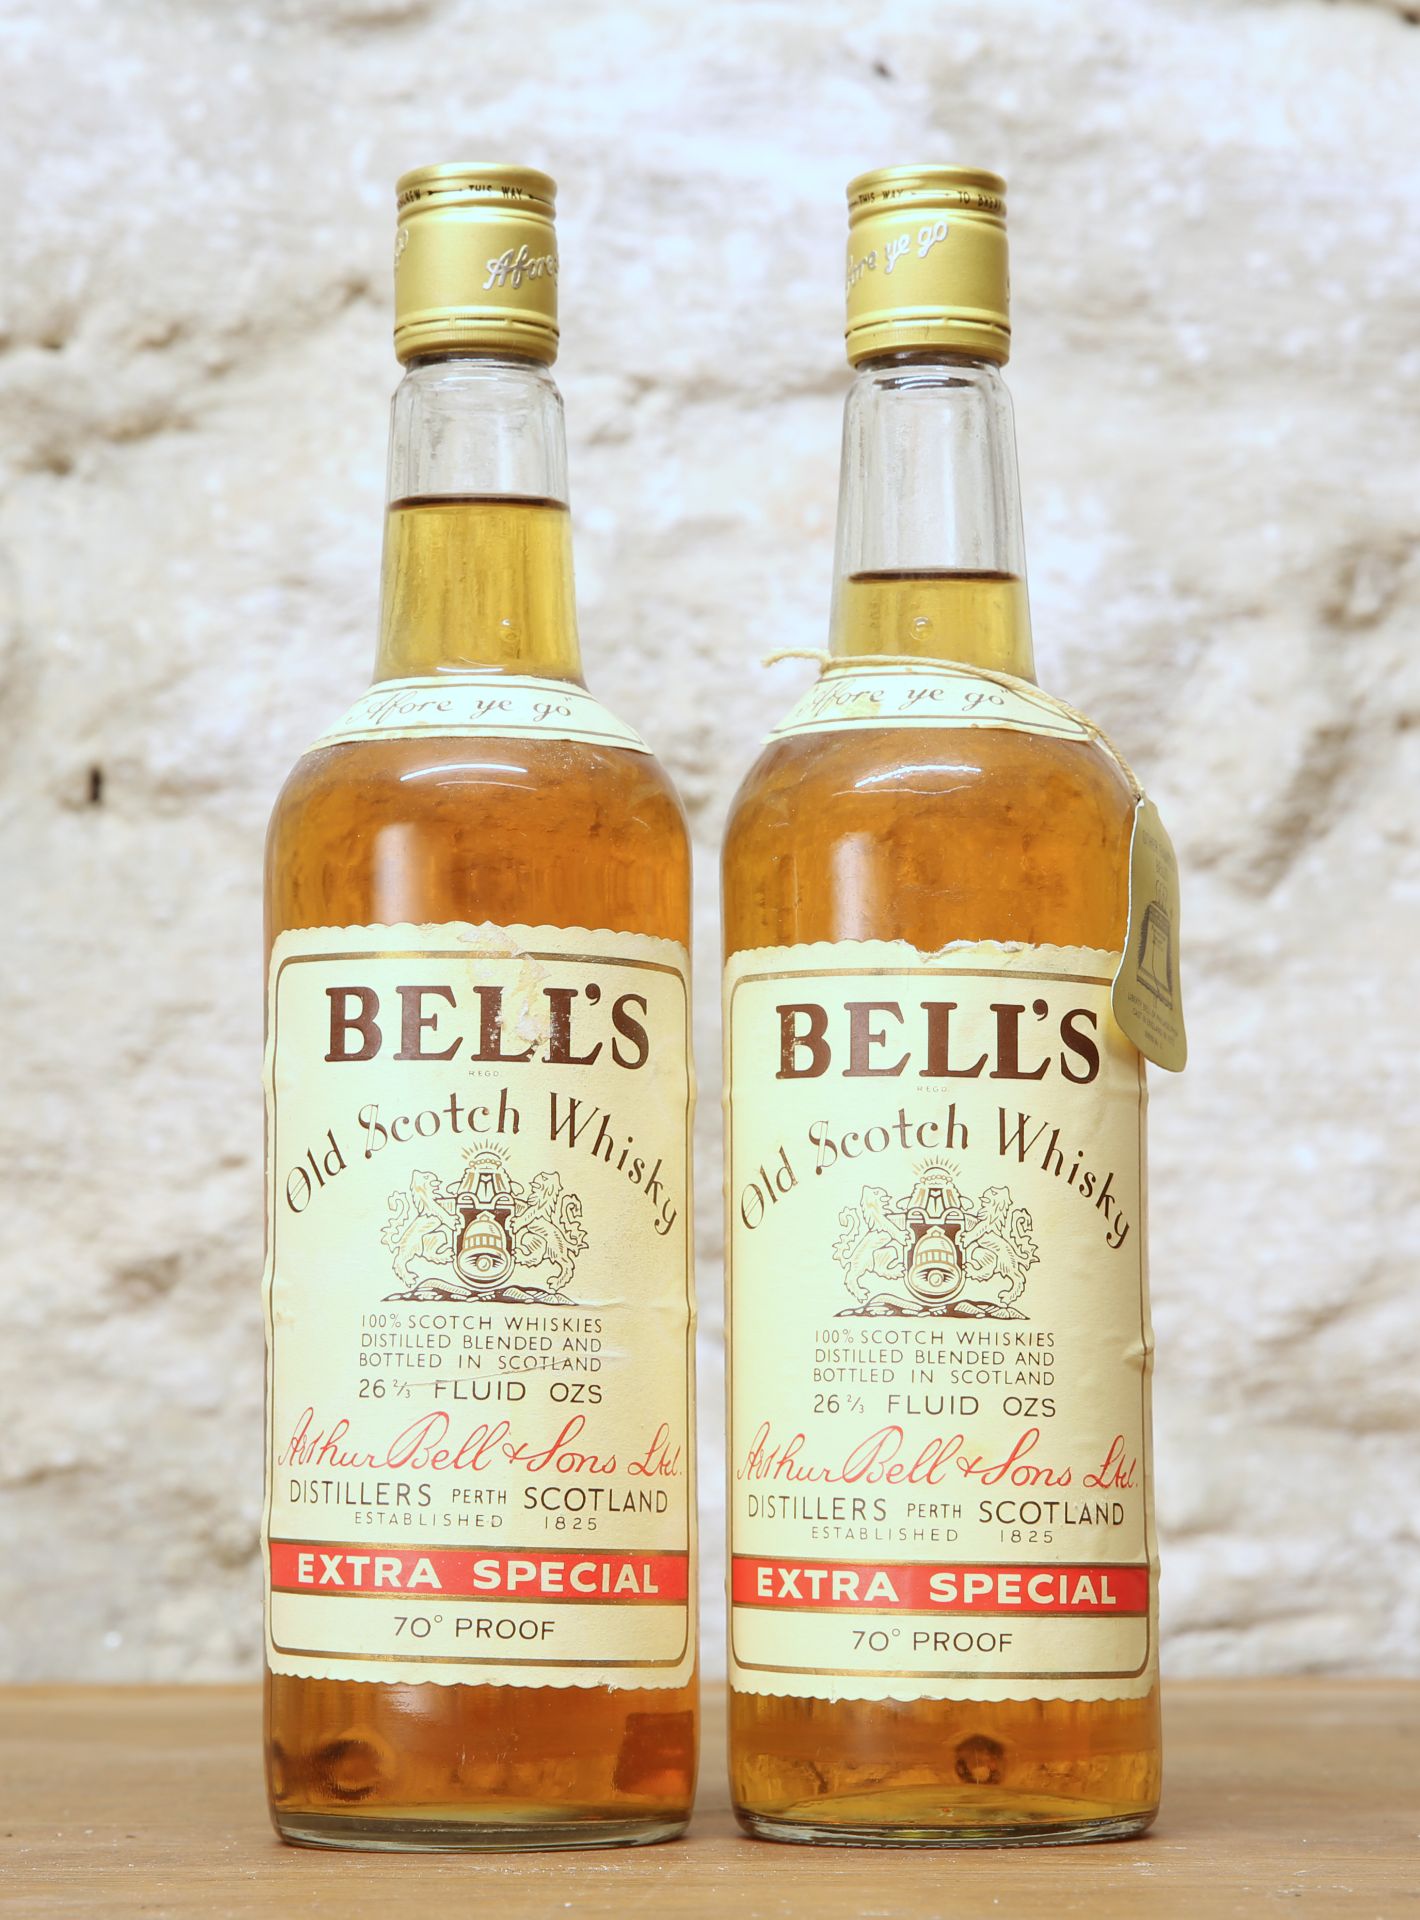 2 BOTTLES FROM 1960'S BELLS 'EXTRA SPECIAL' SCOTCH WHISKY 70 PROOF 262/3 Fl.Ozs